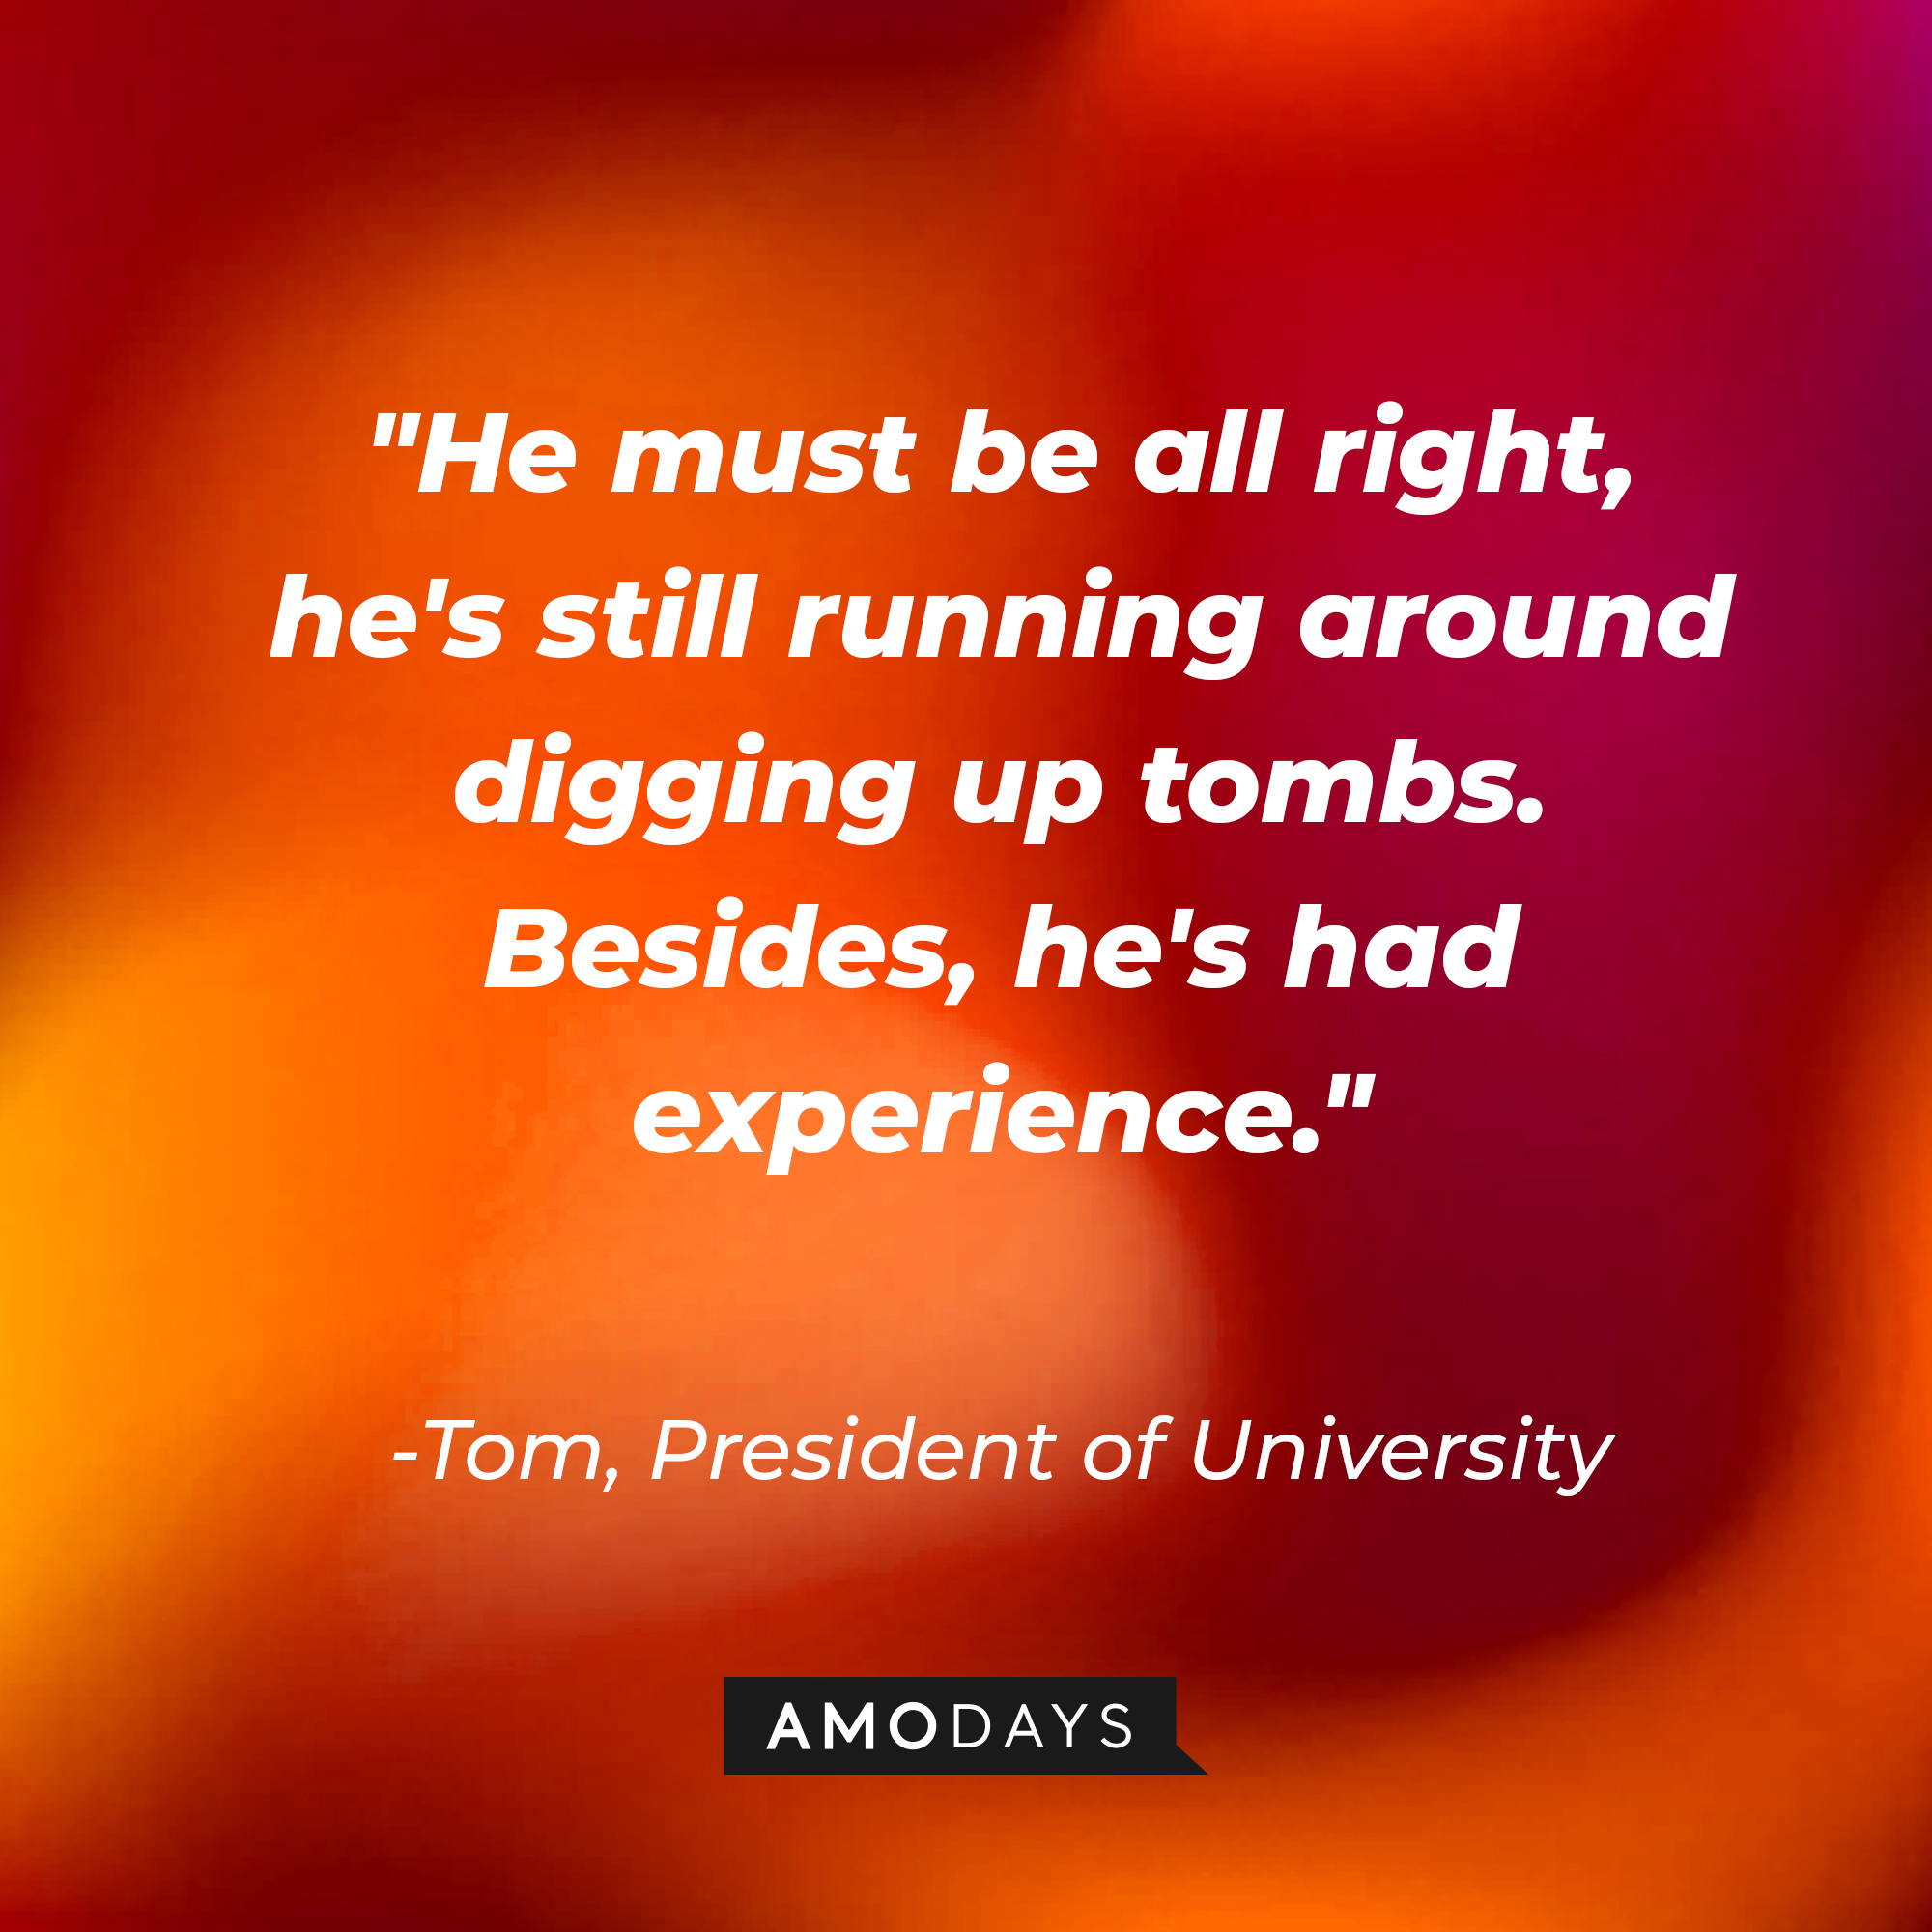 University President Tom's quote: "He must be all right, he's still running around digging up tombs. Besides, he's had experience." | Source: AmoDAys